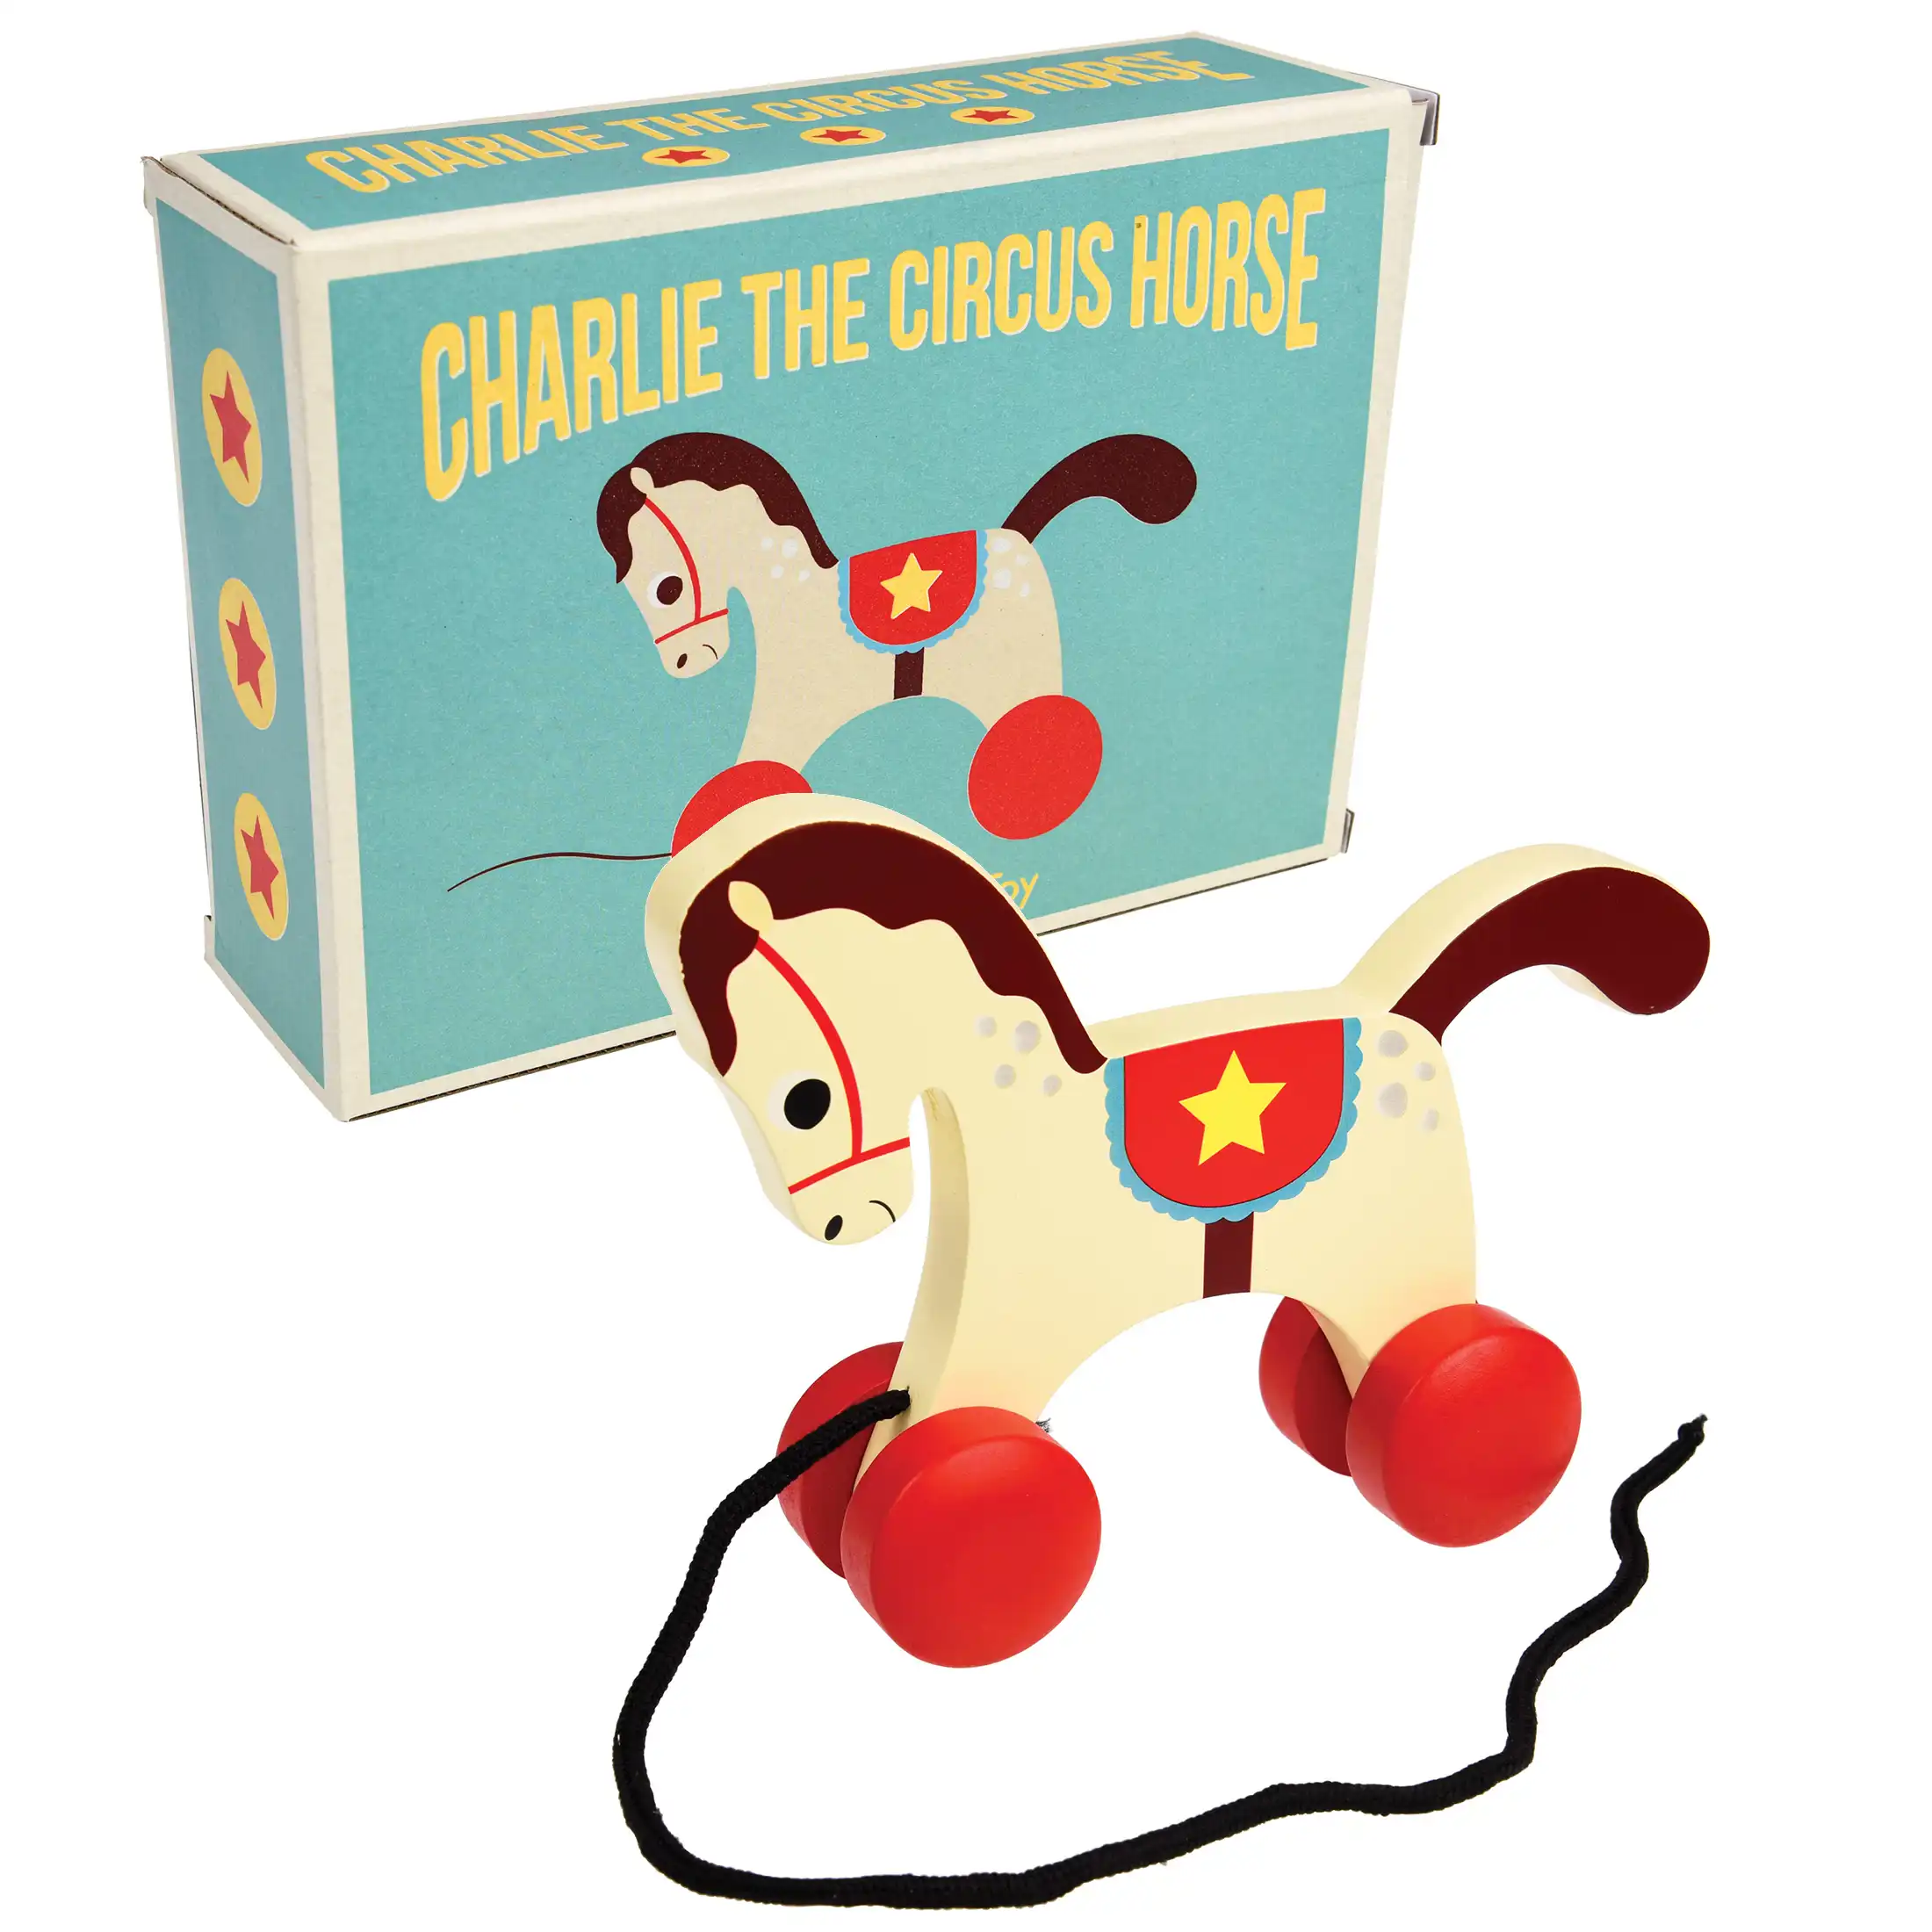 wooden pull toy - charlie the circus horse